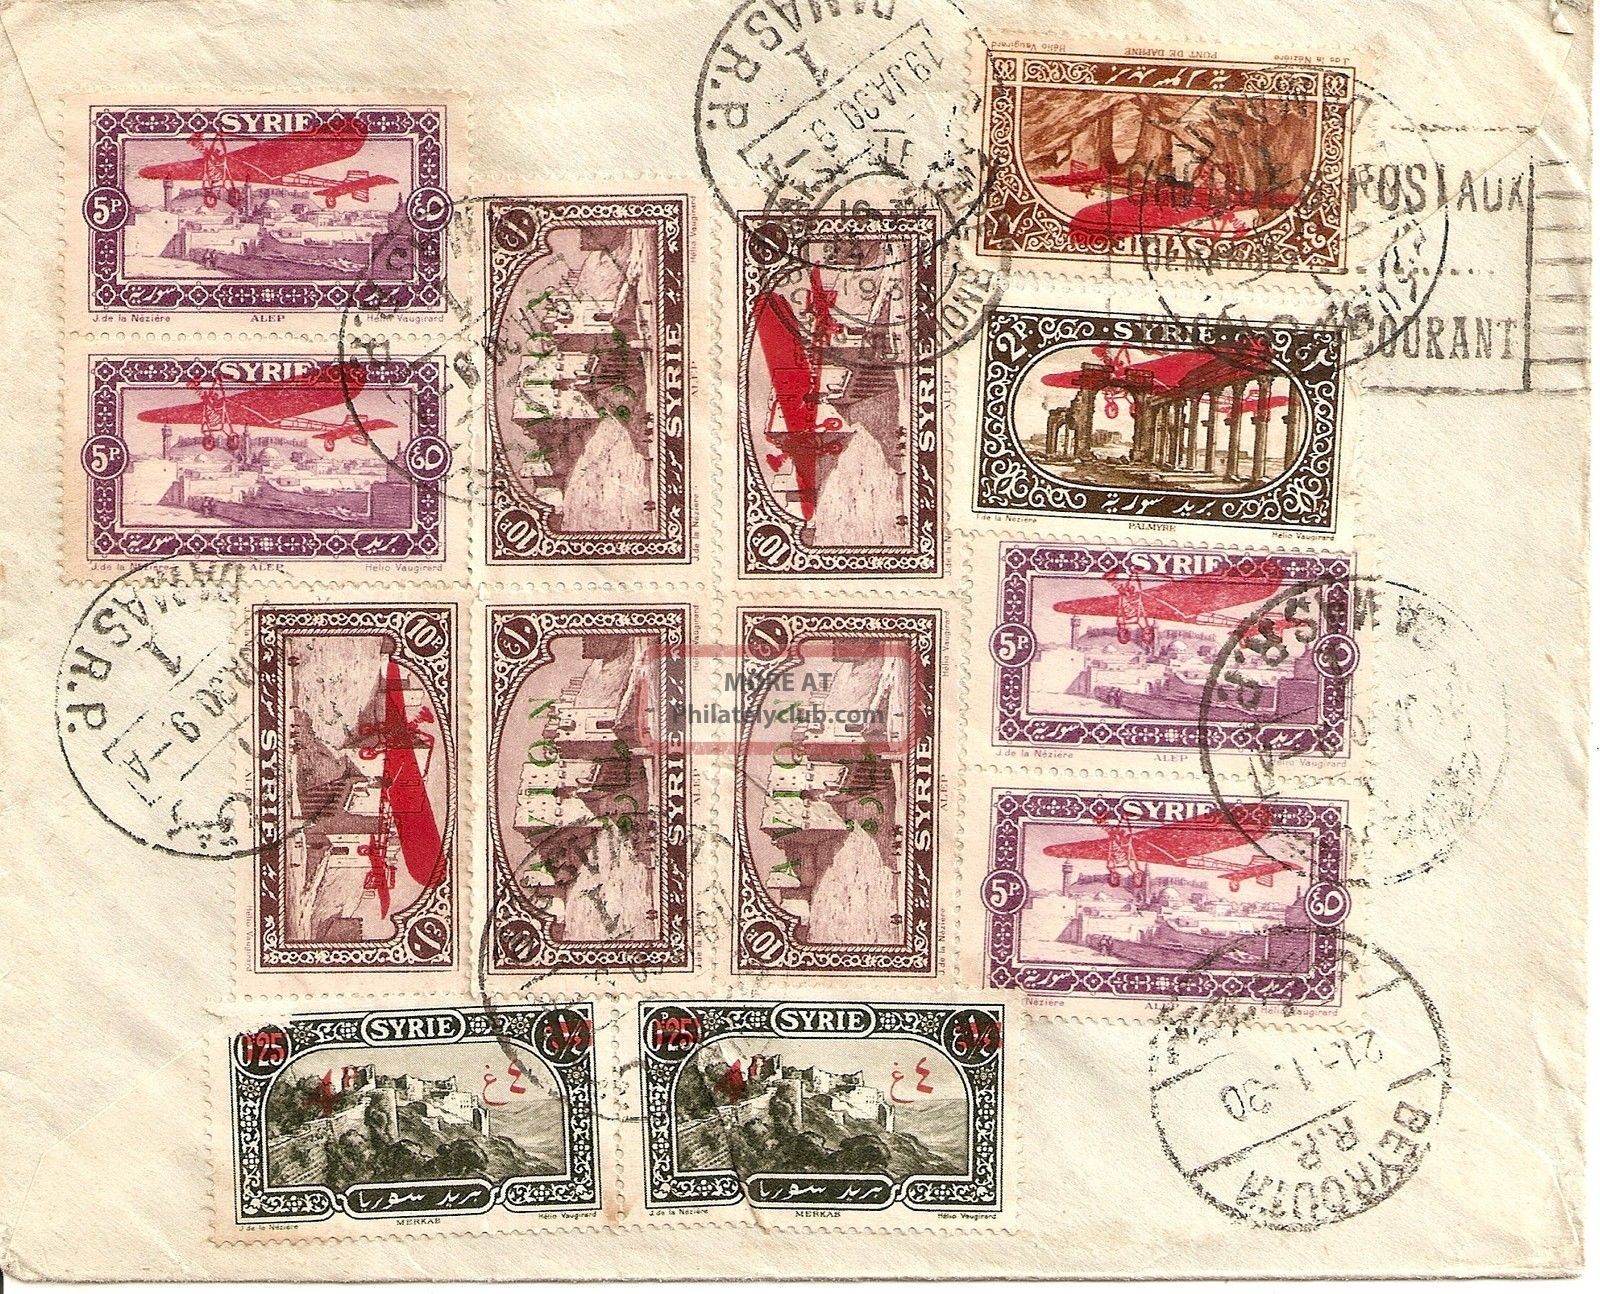 Rare 1930 Syria Overprinted Airmail Cover Damas To France Plane Middle East photo